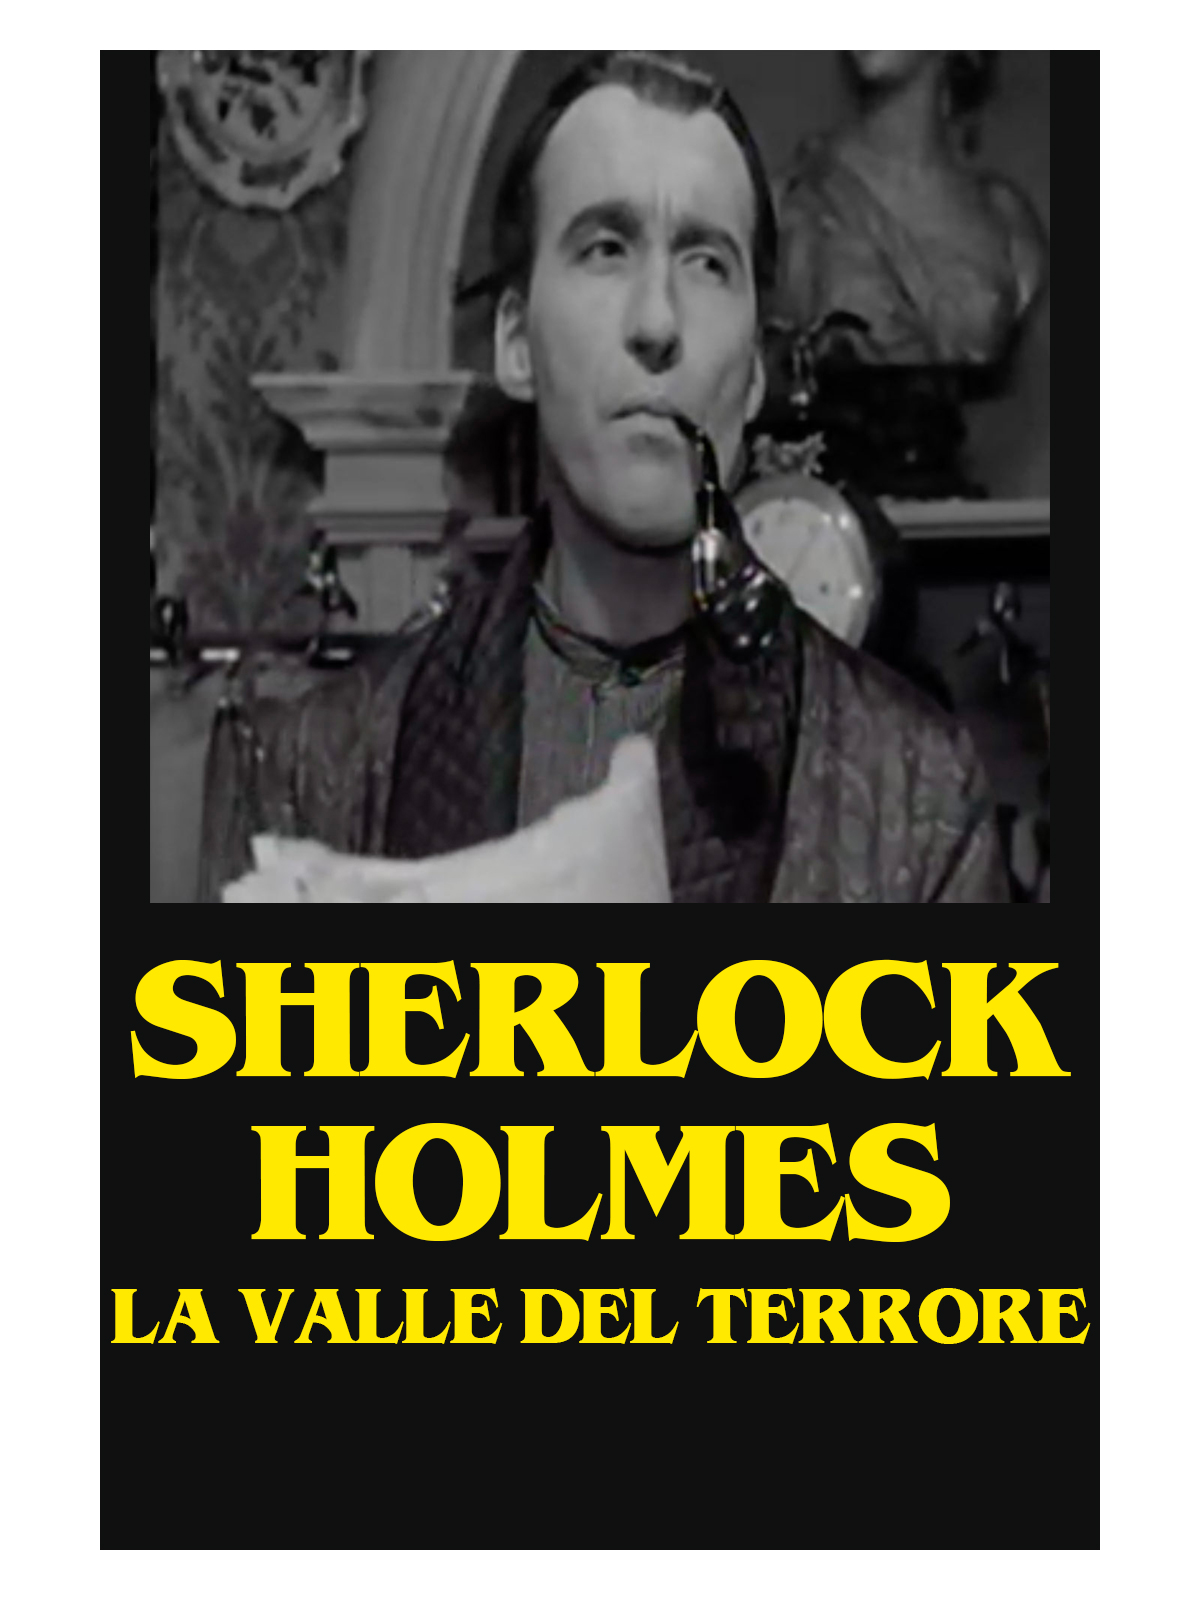 Sherlock Holmes and the deadly necklace